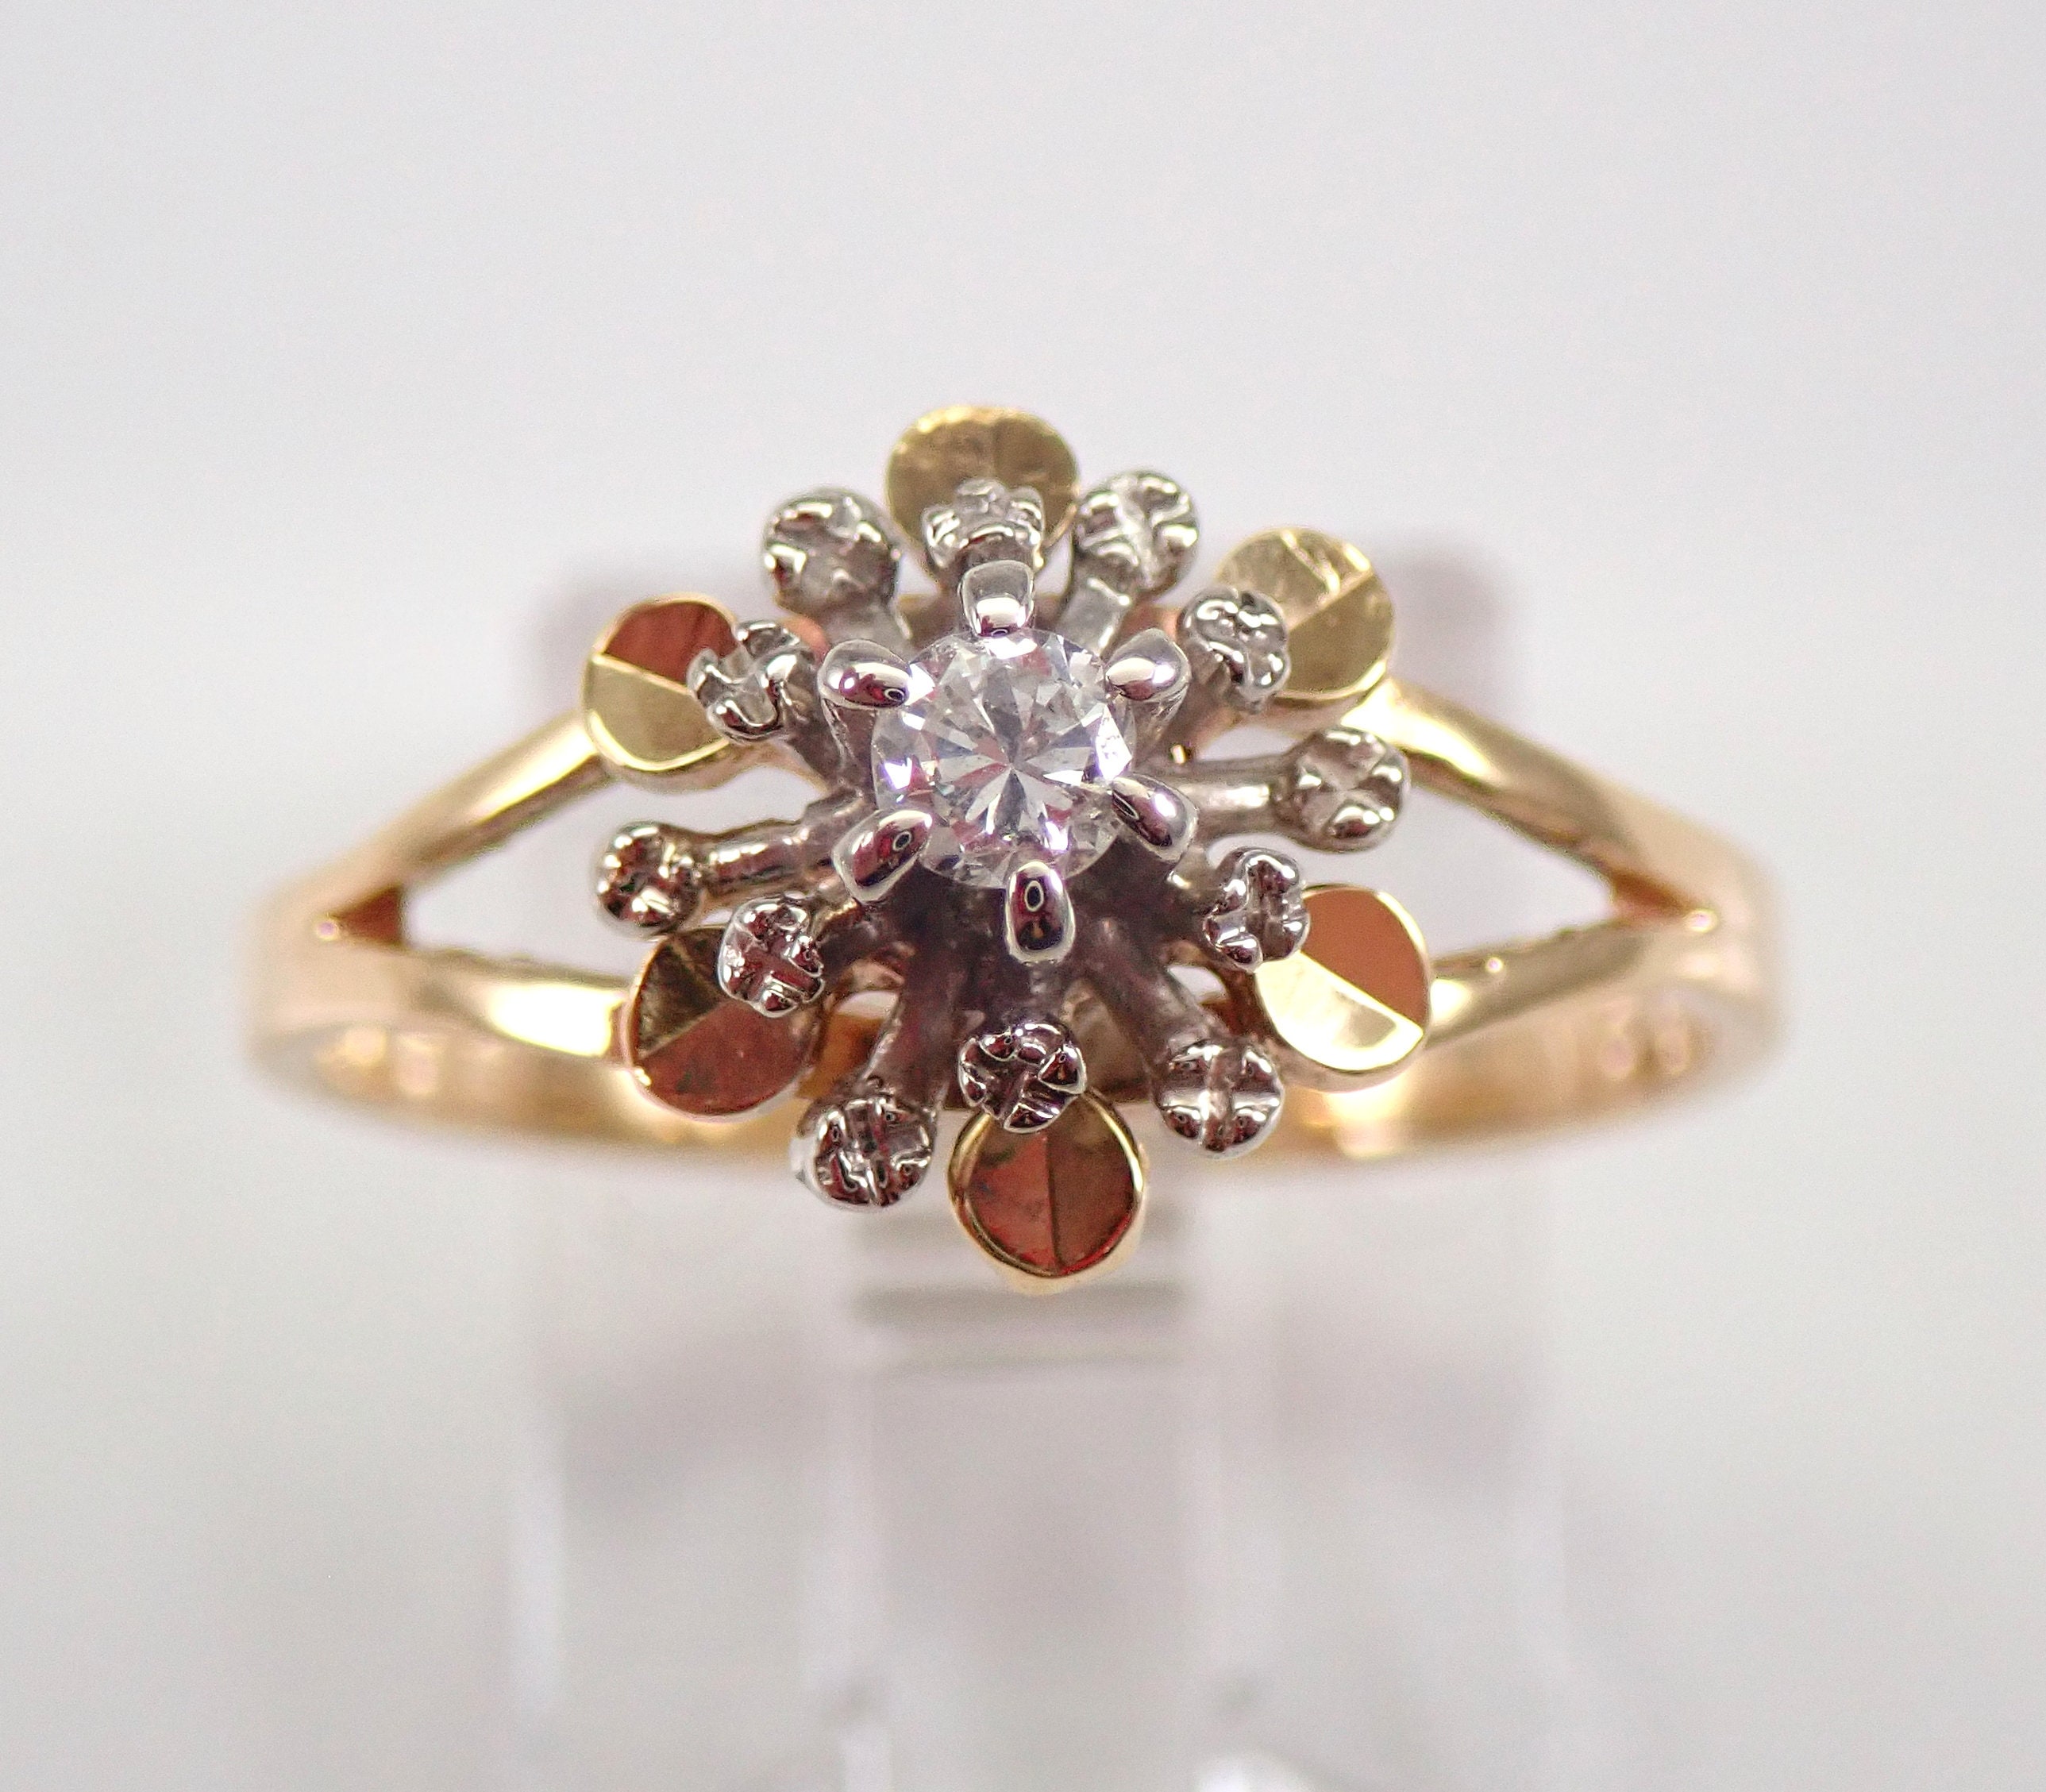 Antique Flower Shaped Cluster Diamond Ring